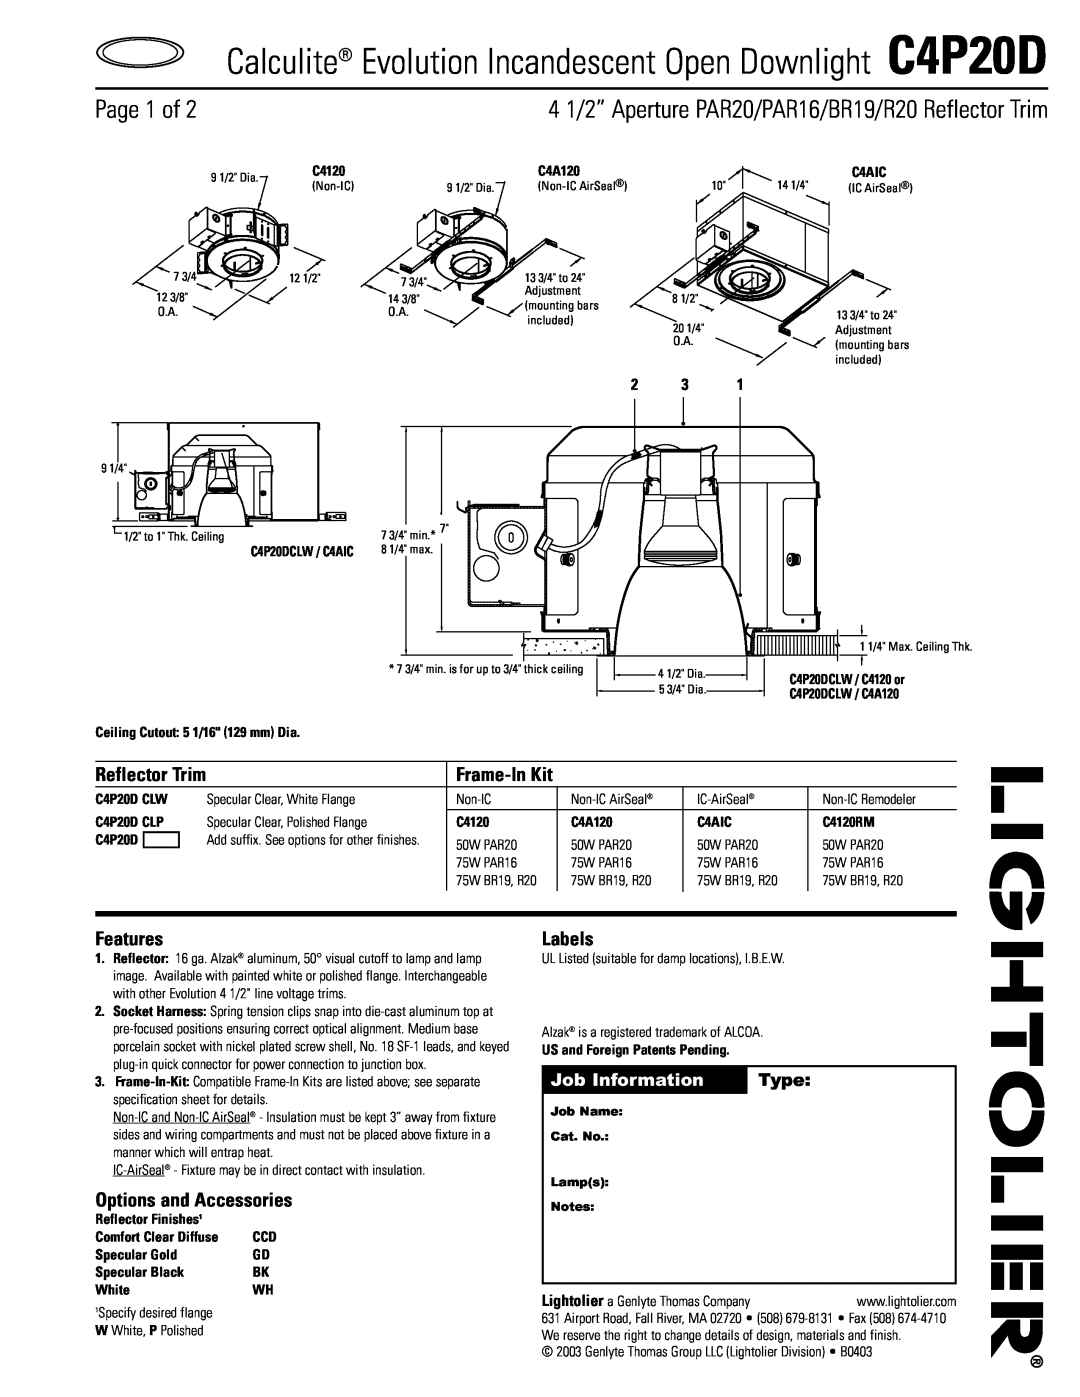 Lightolier C4P20D specifications Page 1 of, Job Information, Type, Features, Options and Accessories, Labels, Frame-InKit 